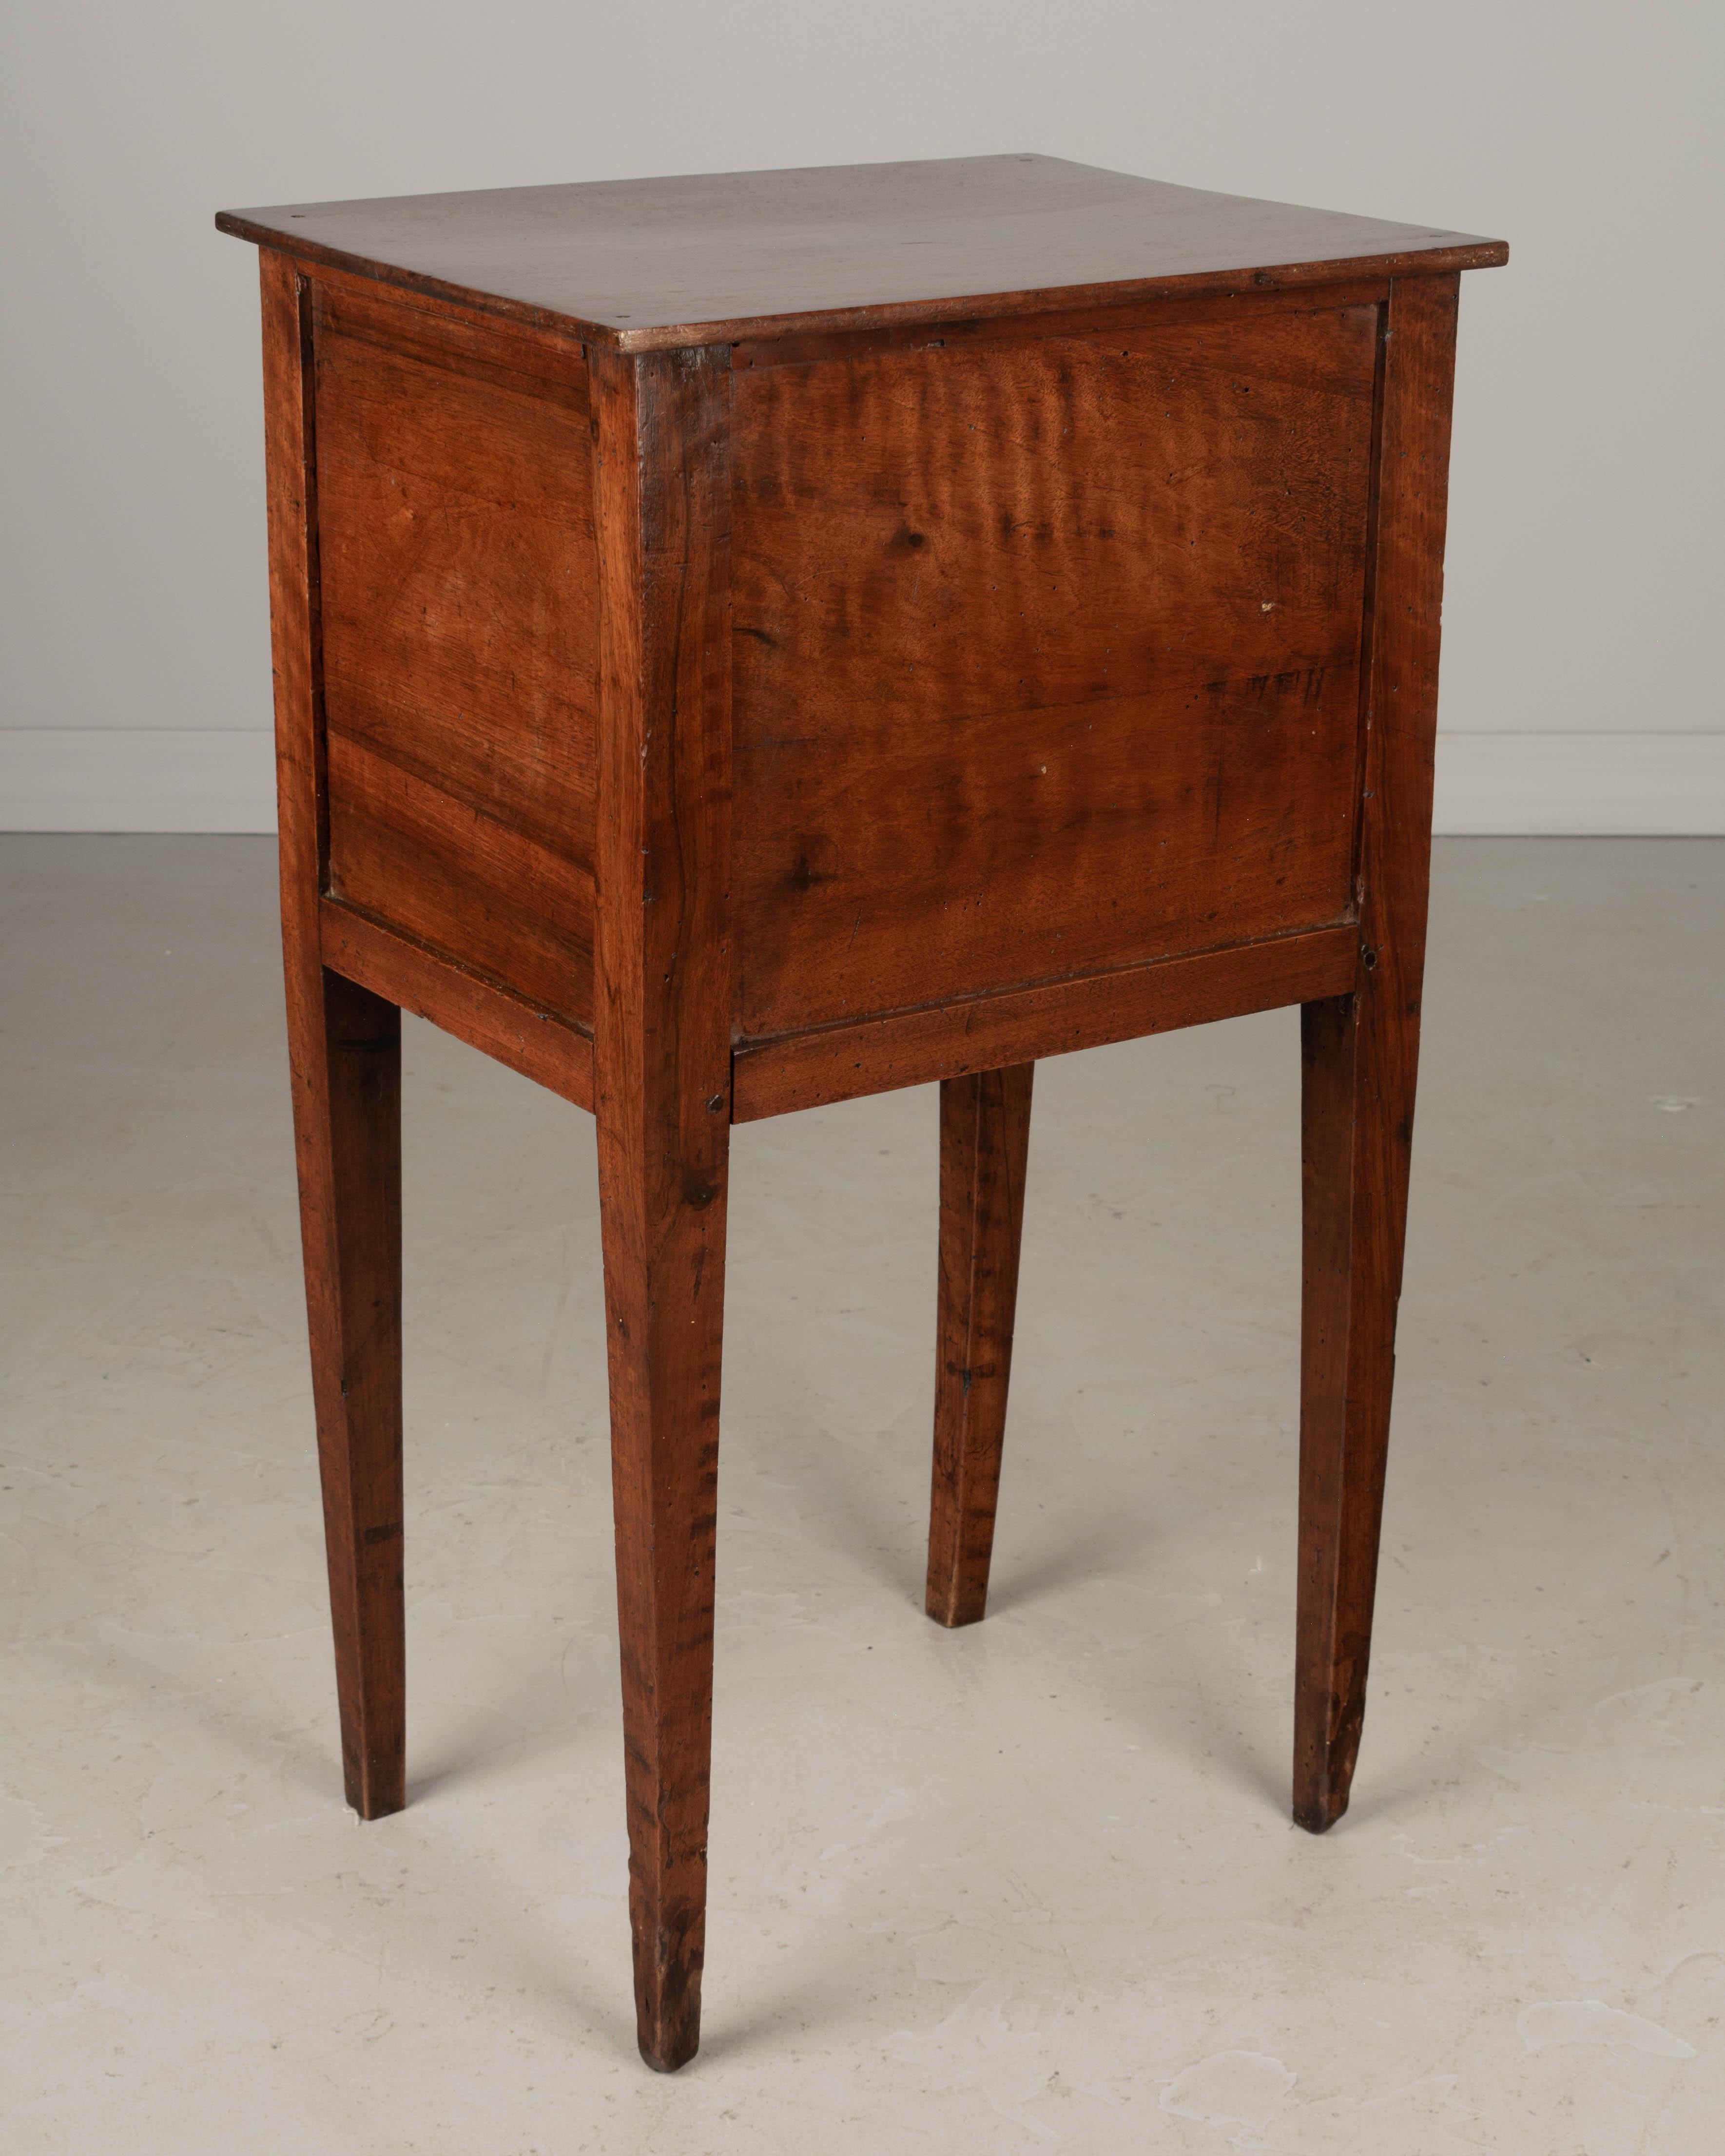 An early 19th century Country French side table, handcrafted of solid walnut and finished on all four sides. Three dovetailed drawers with mahogany face, two with working locks and one key. One brass knob is not matching. Sturdy tapered legs. Pegged